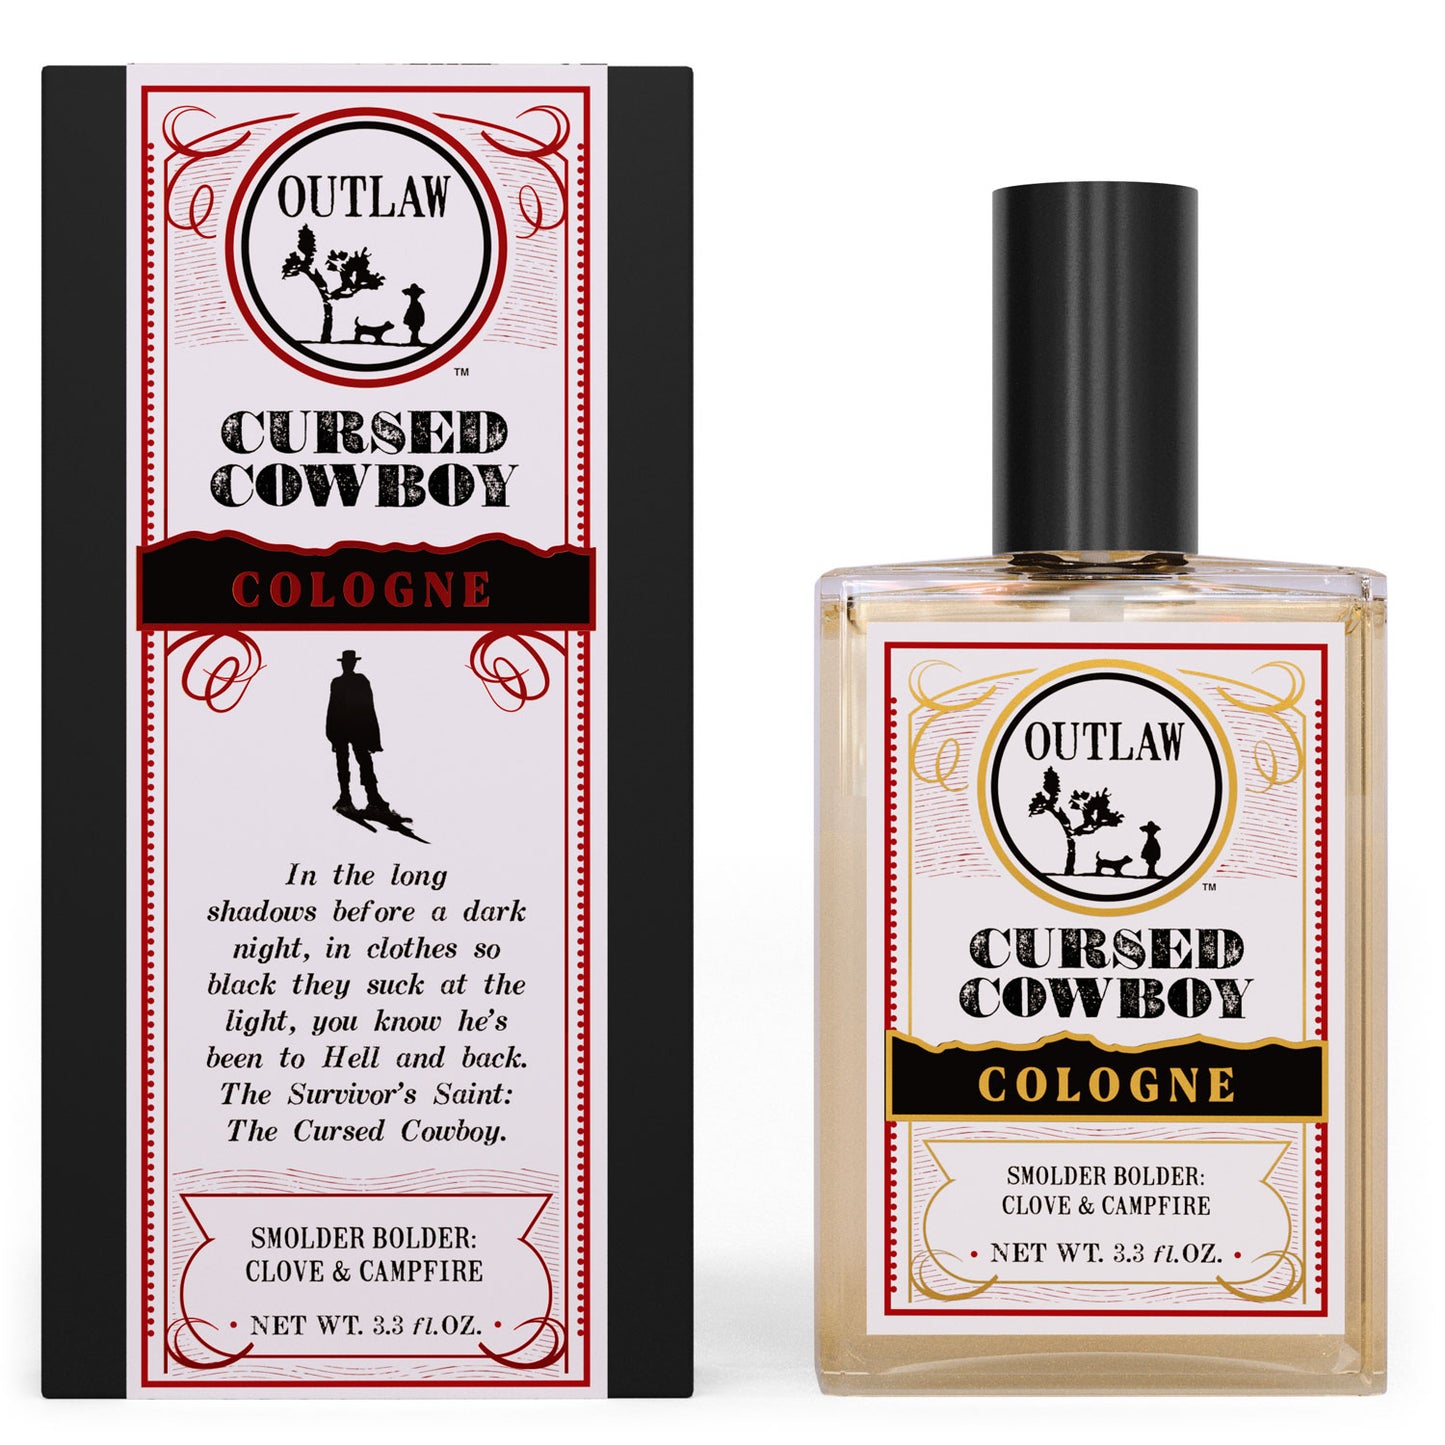 Outlaw spray cologne with Cursed Cowboy scent